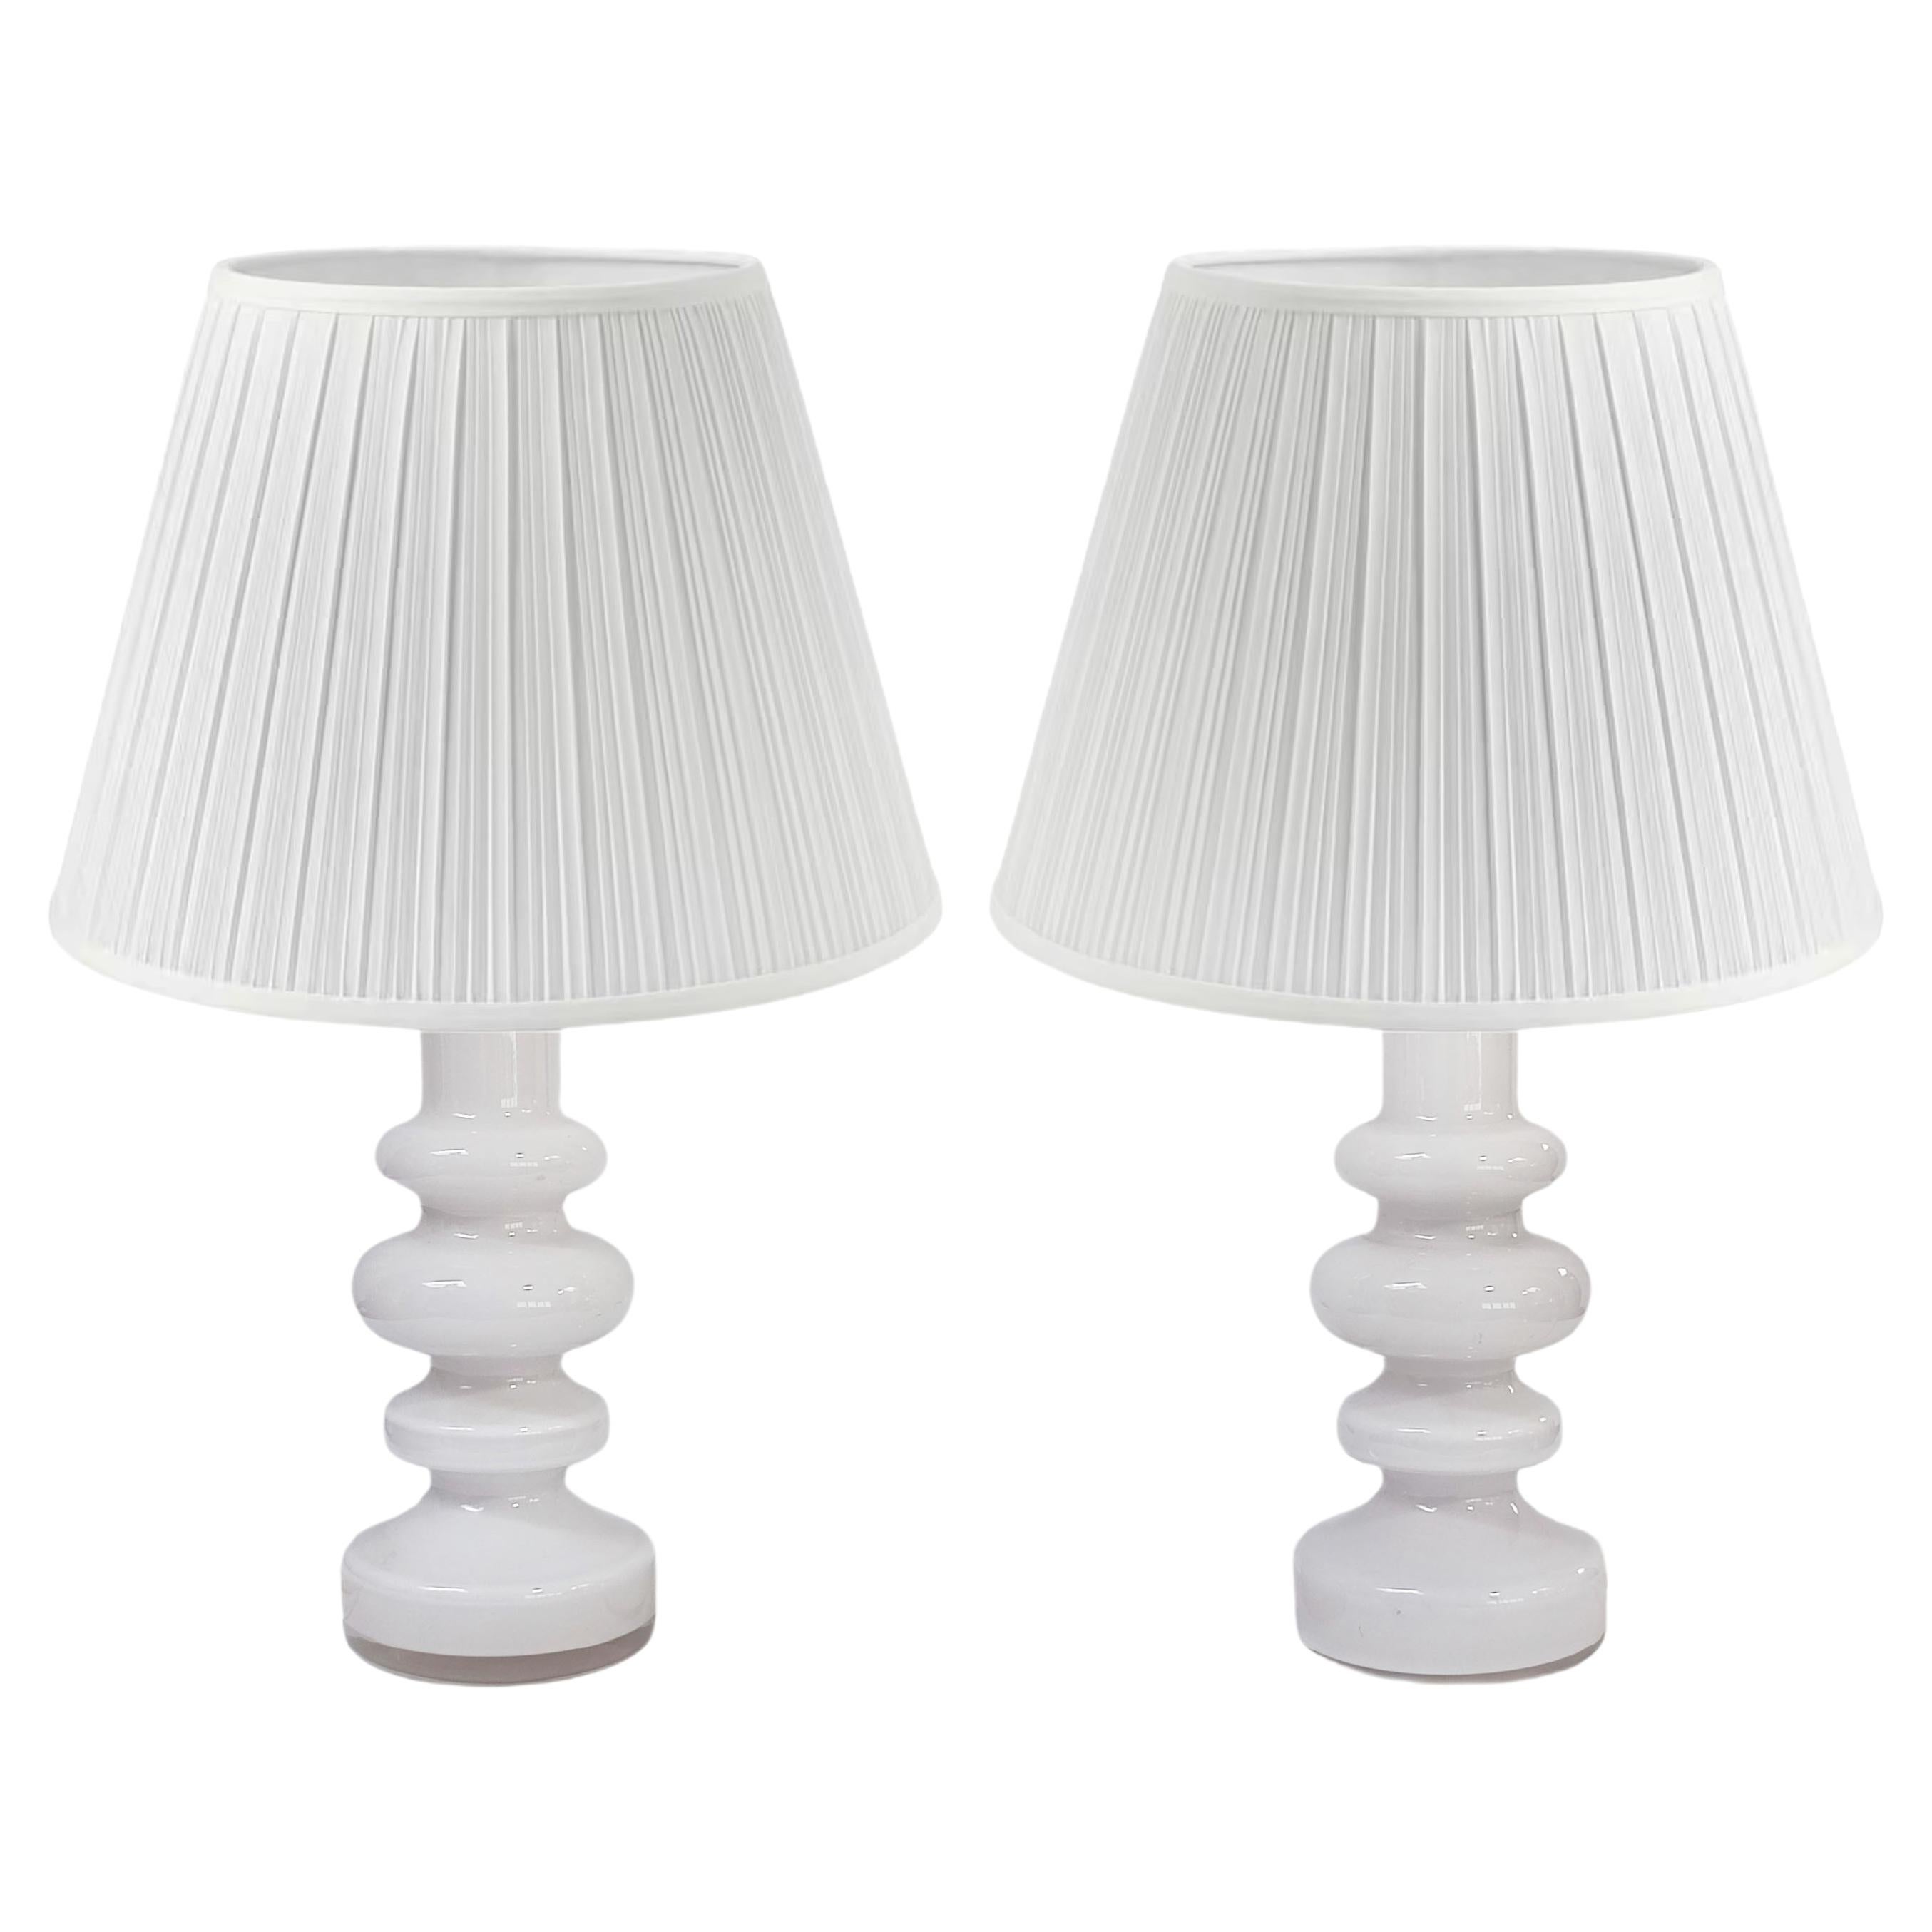 Pair of Rare White Glass Table Lamps by Gunnar Anders, Lindshammar, 1960s For Sale